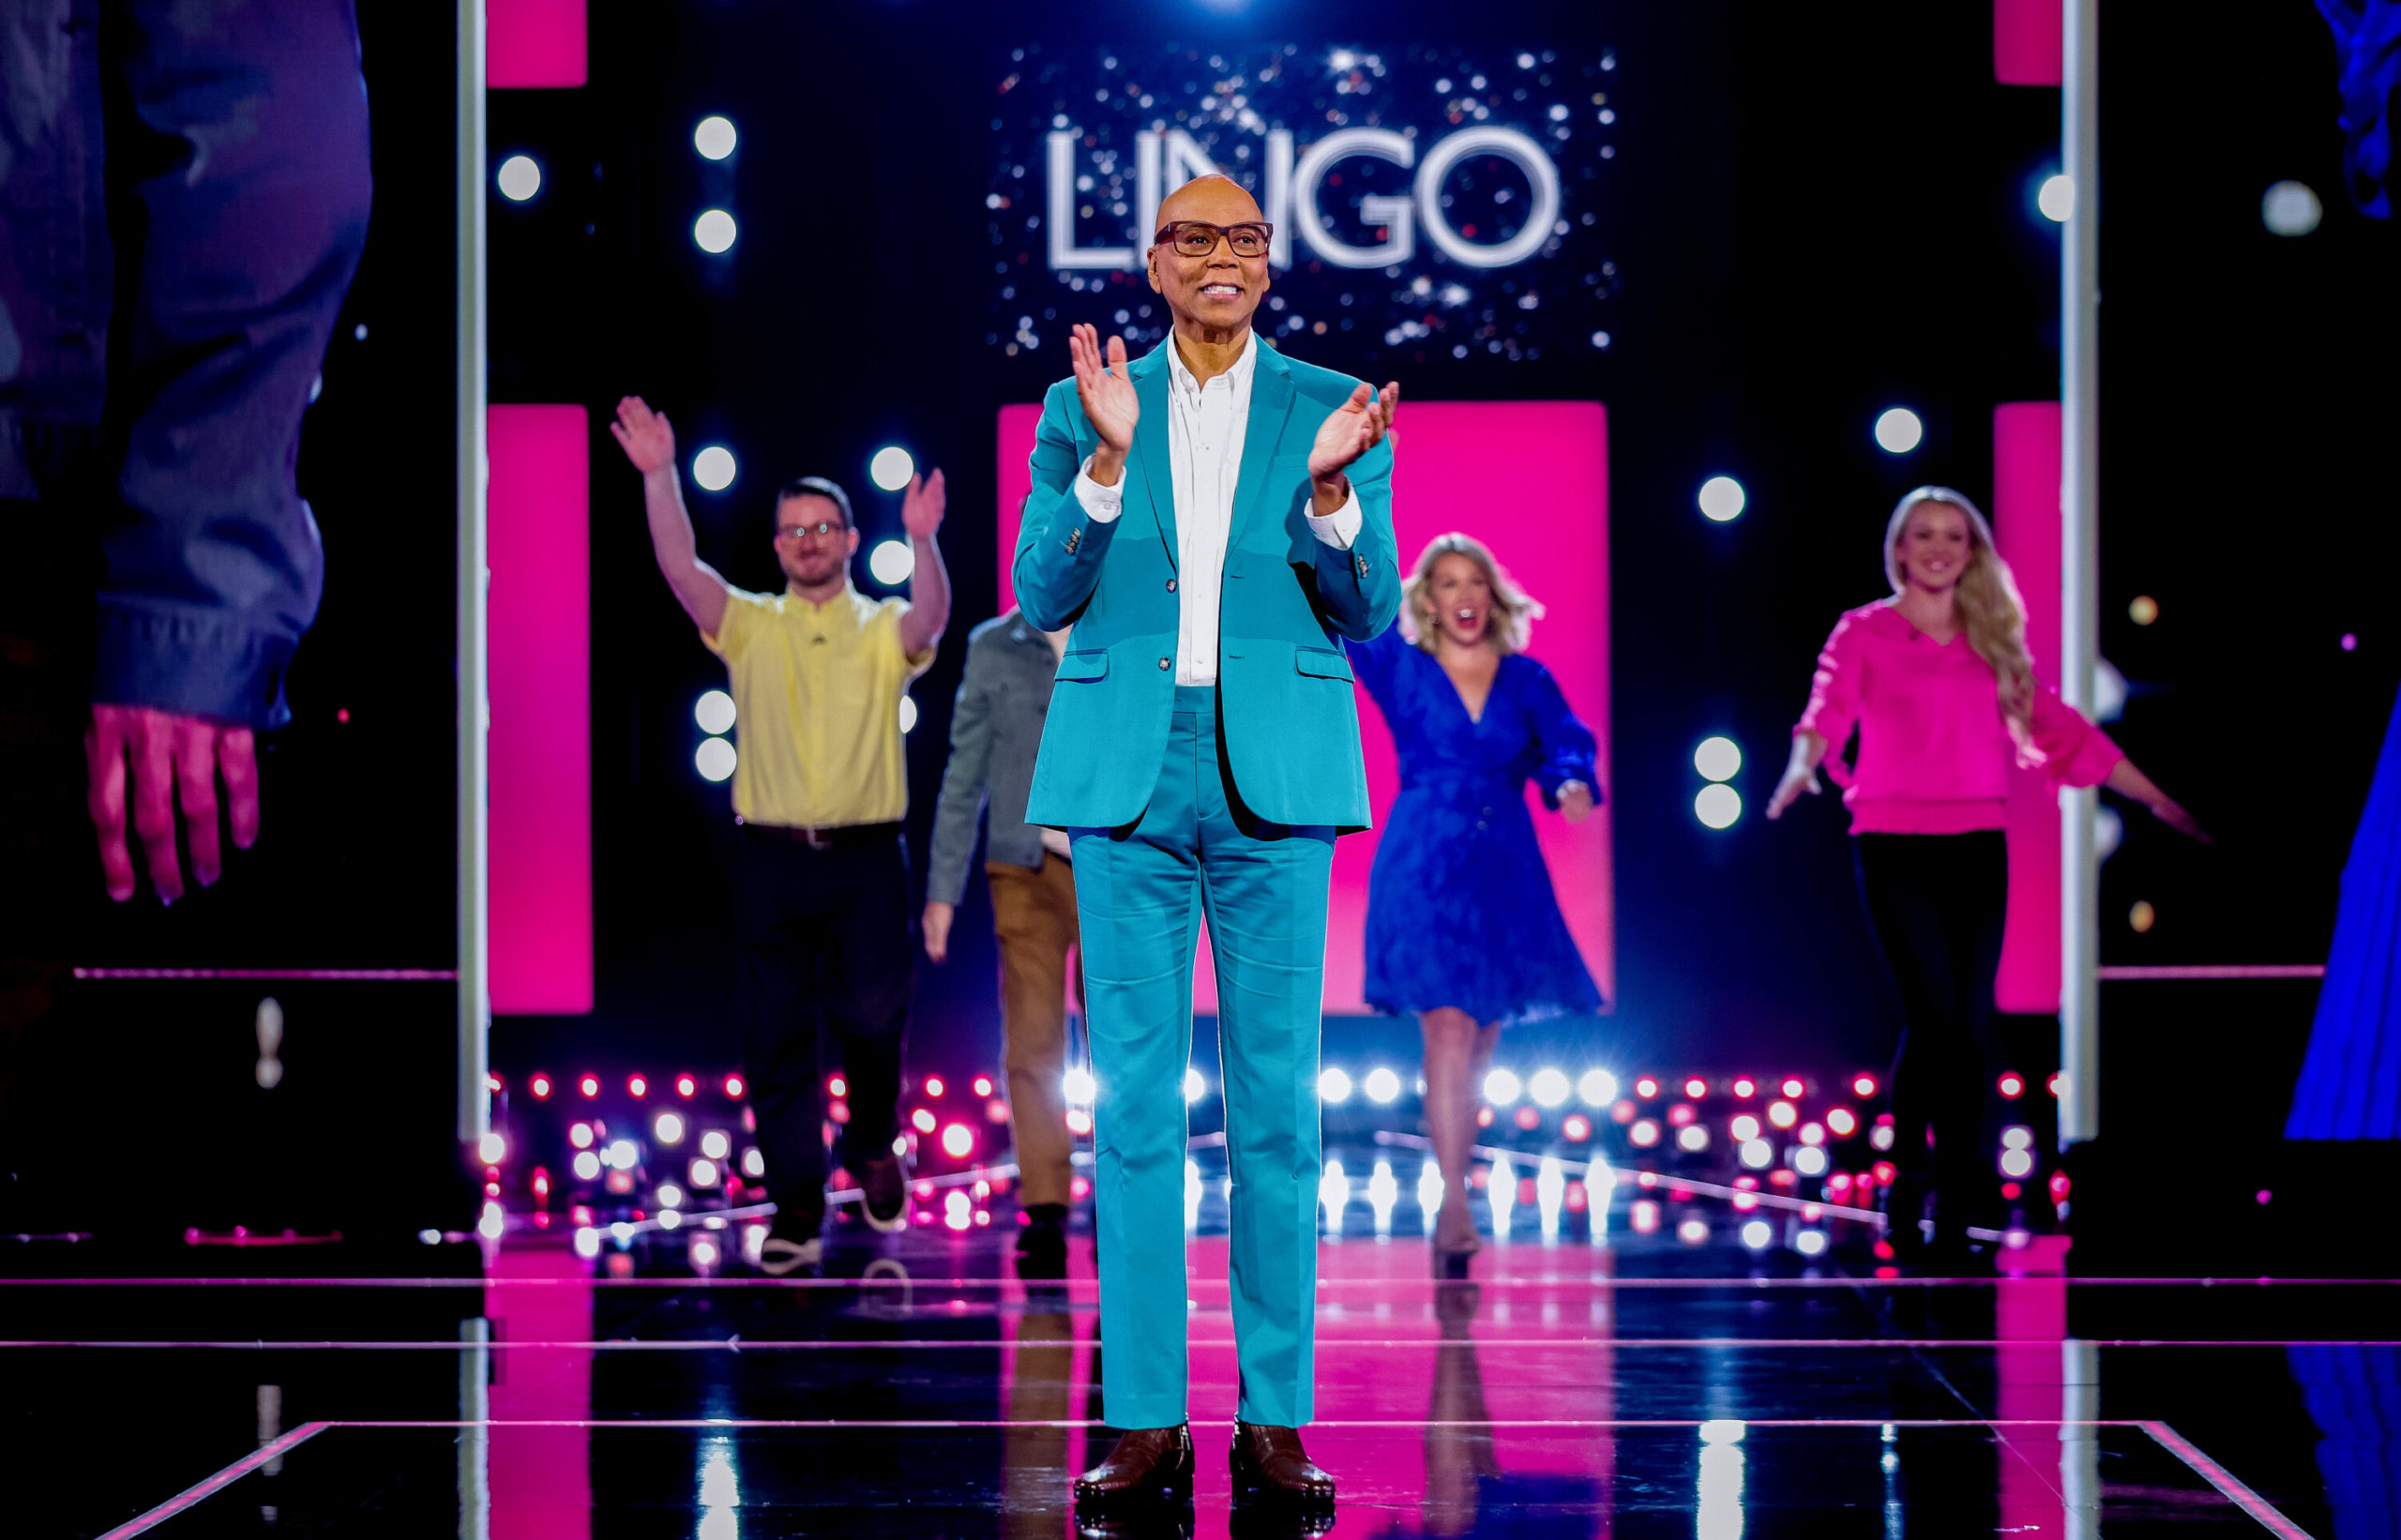 #Lingo: CBS Pulls Wednesday Night Game Show But It’s Not Cancelled